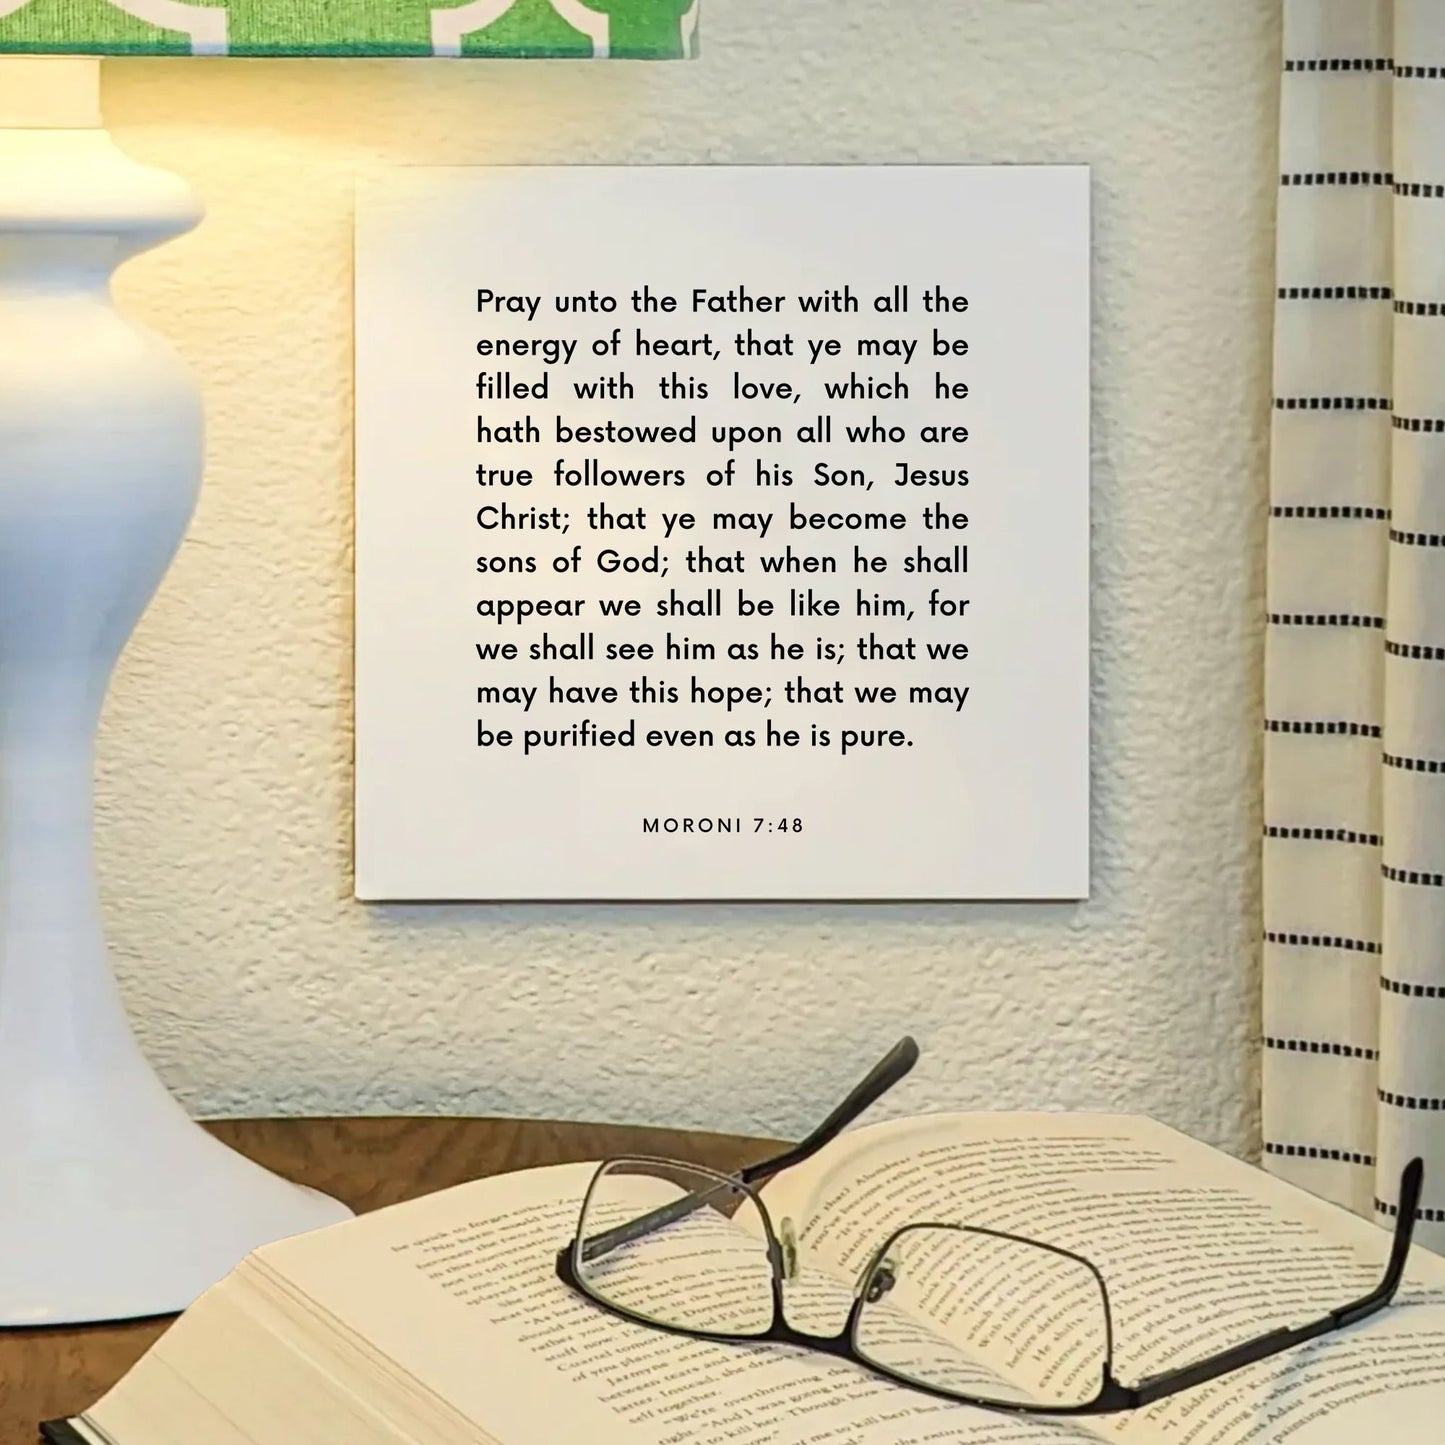 Lamp mouting of the scripture tile for Moroni 7:48 - "Pray unto the Father with all the energy of heart"